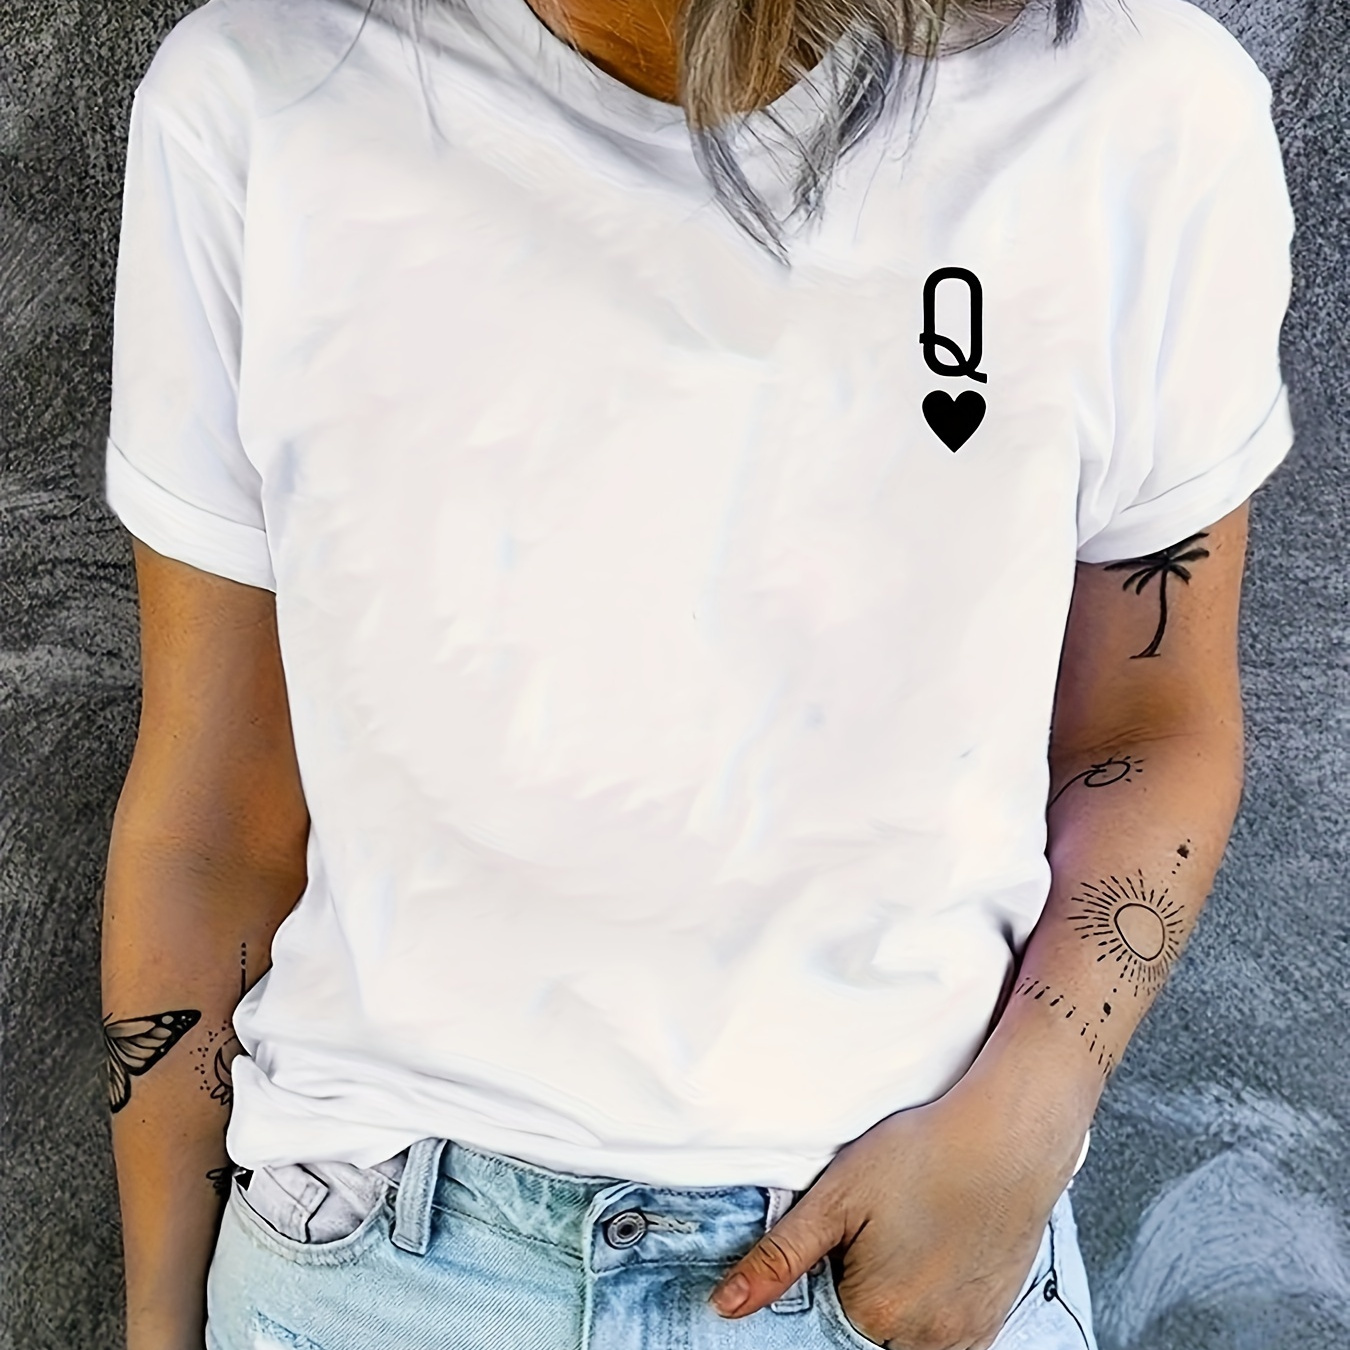 

Heart & Q Print T-shirt, Casual Crew Neck Short Sleeve Top For Spring & Summer, Women's Clothing